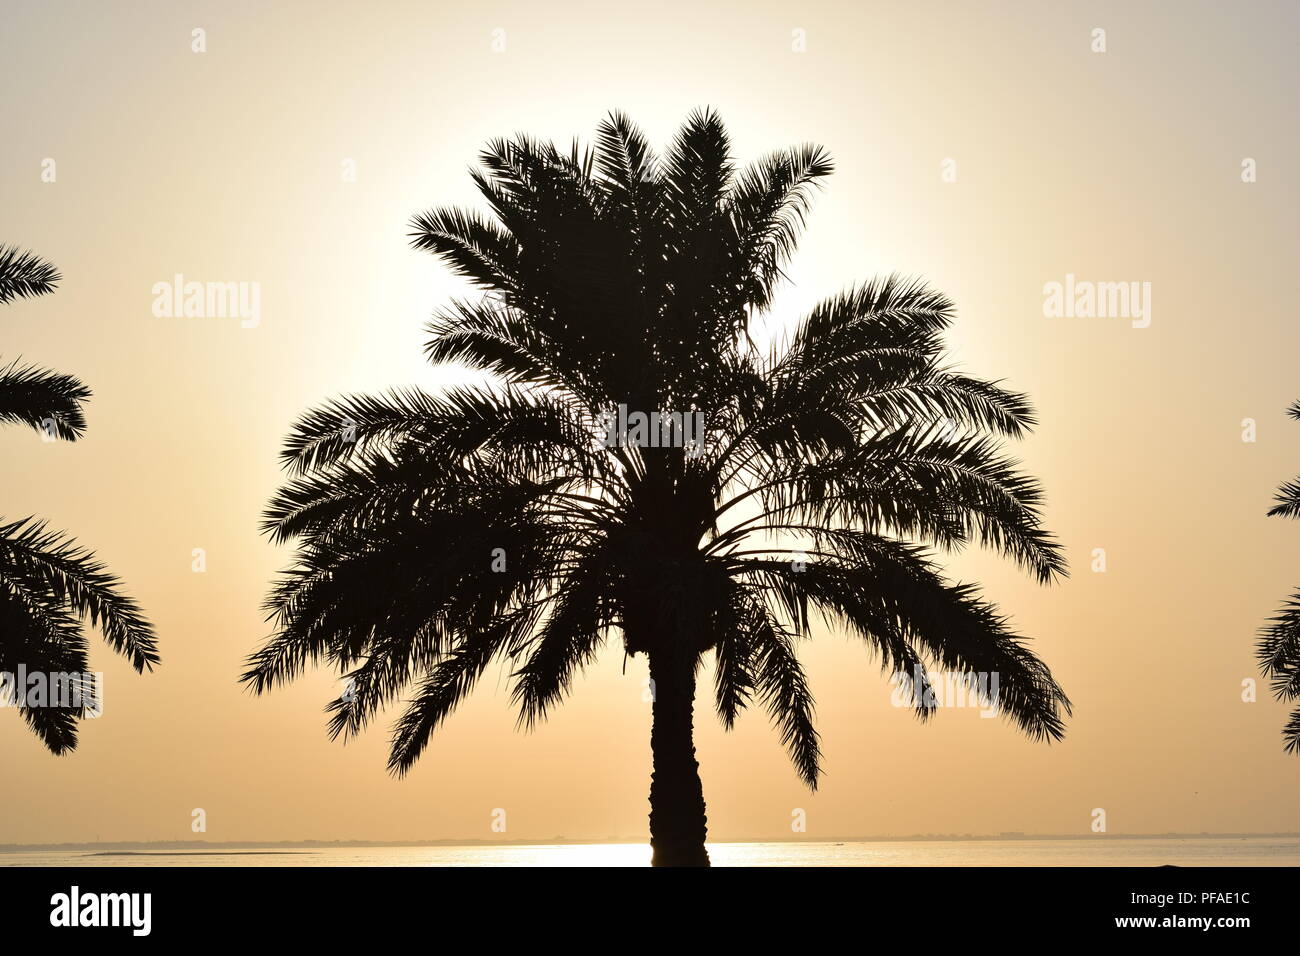 Palm Trees silhouetted against against a dusk sky during sunset in the City of Dammam Stock Photo